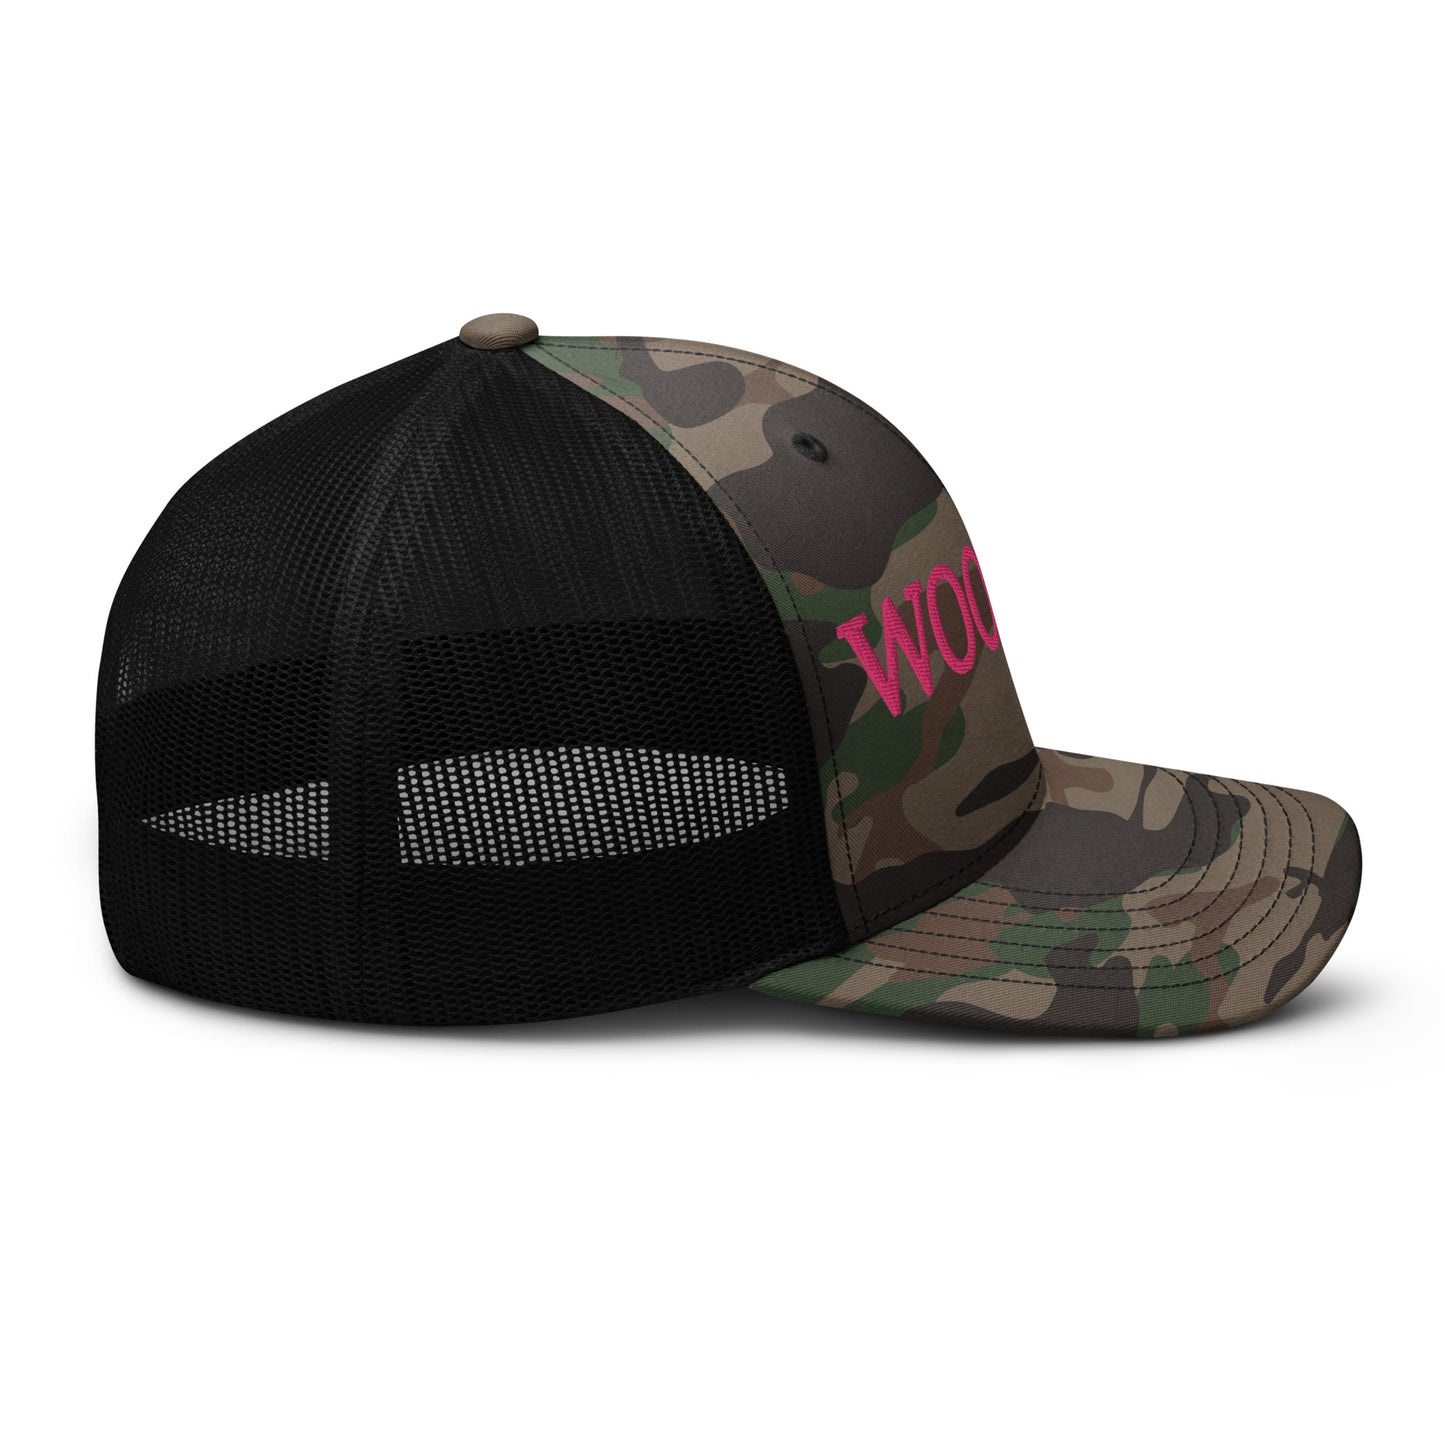 WOO GIRL Camouflage Trucker Hat (pink lettering)